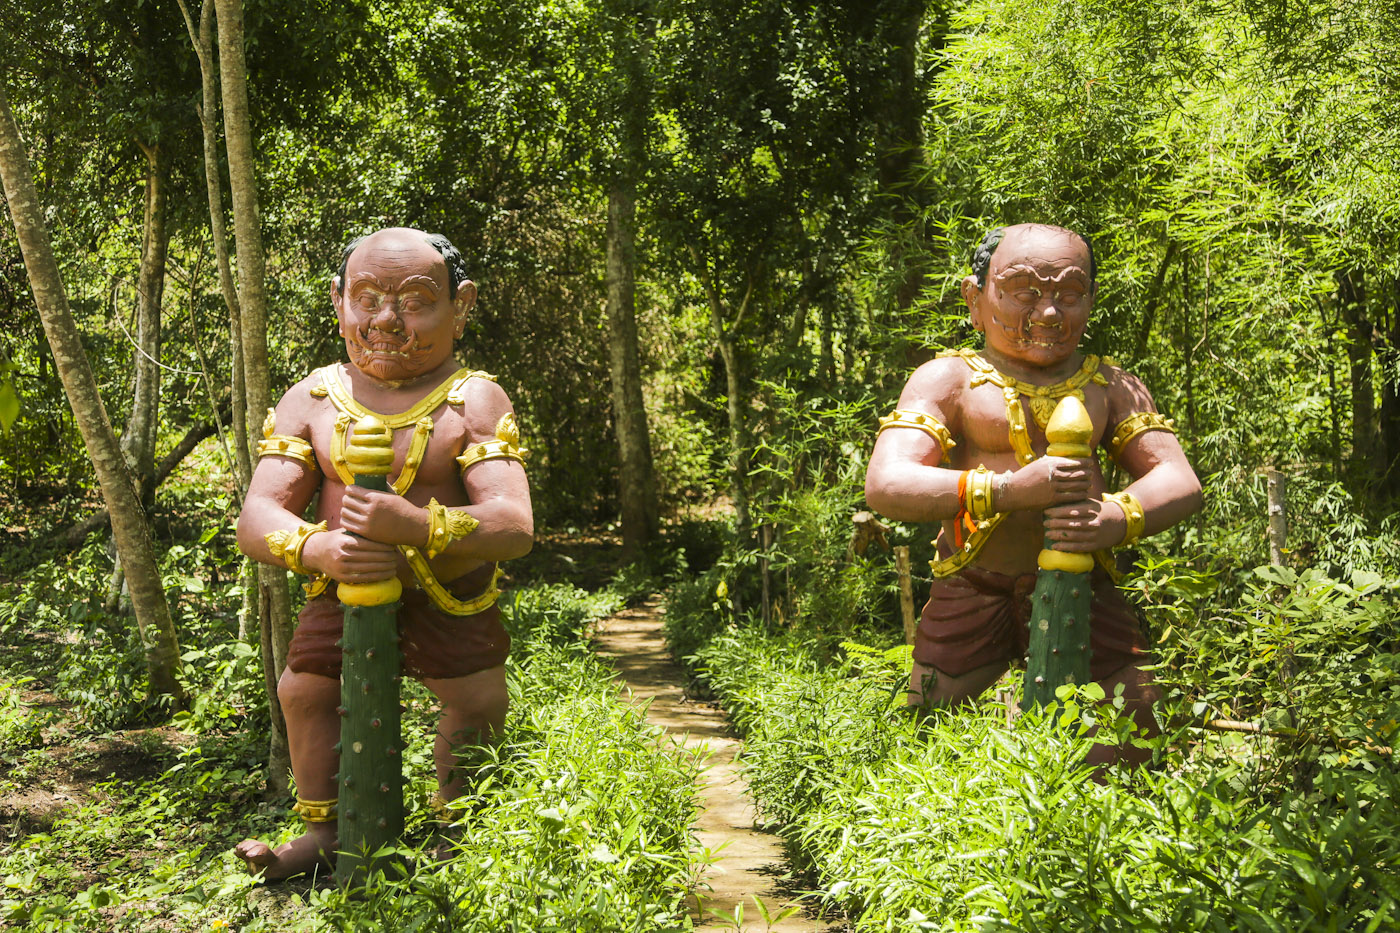 Statues of the guardians of the path that leads to the cemetery